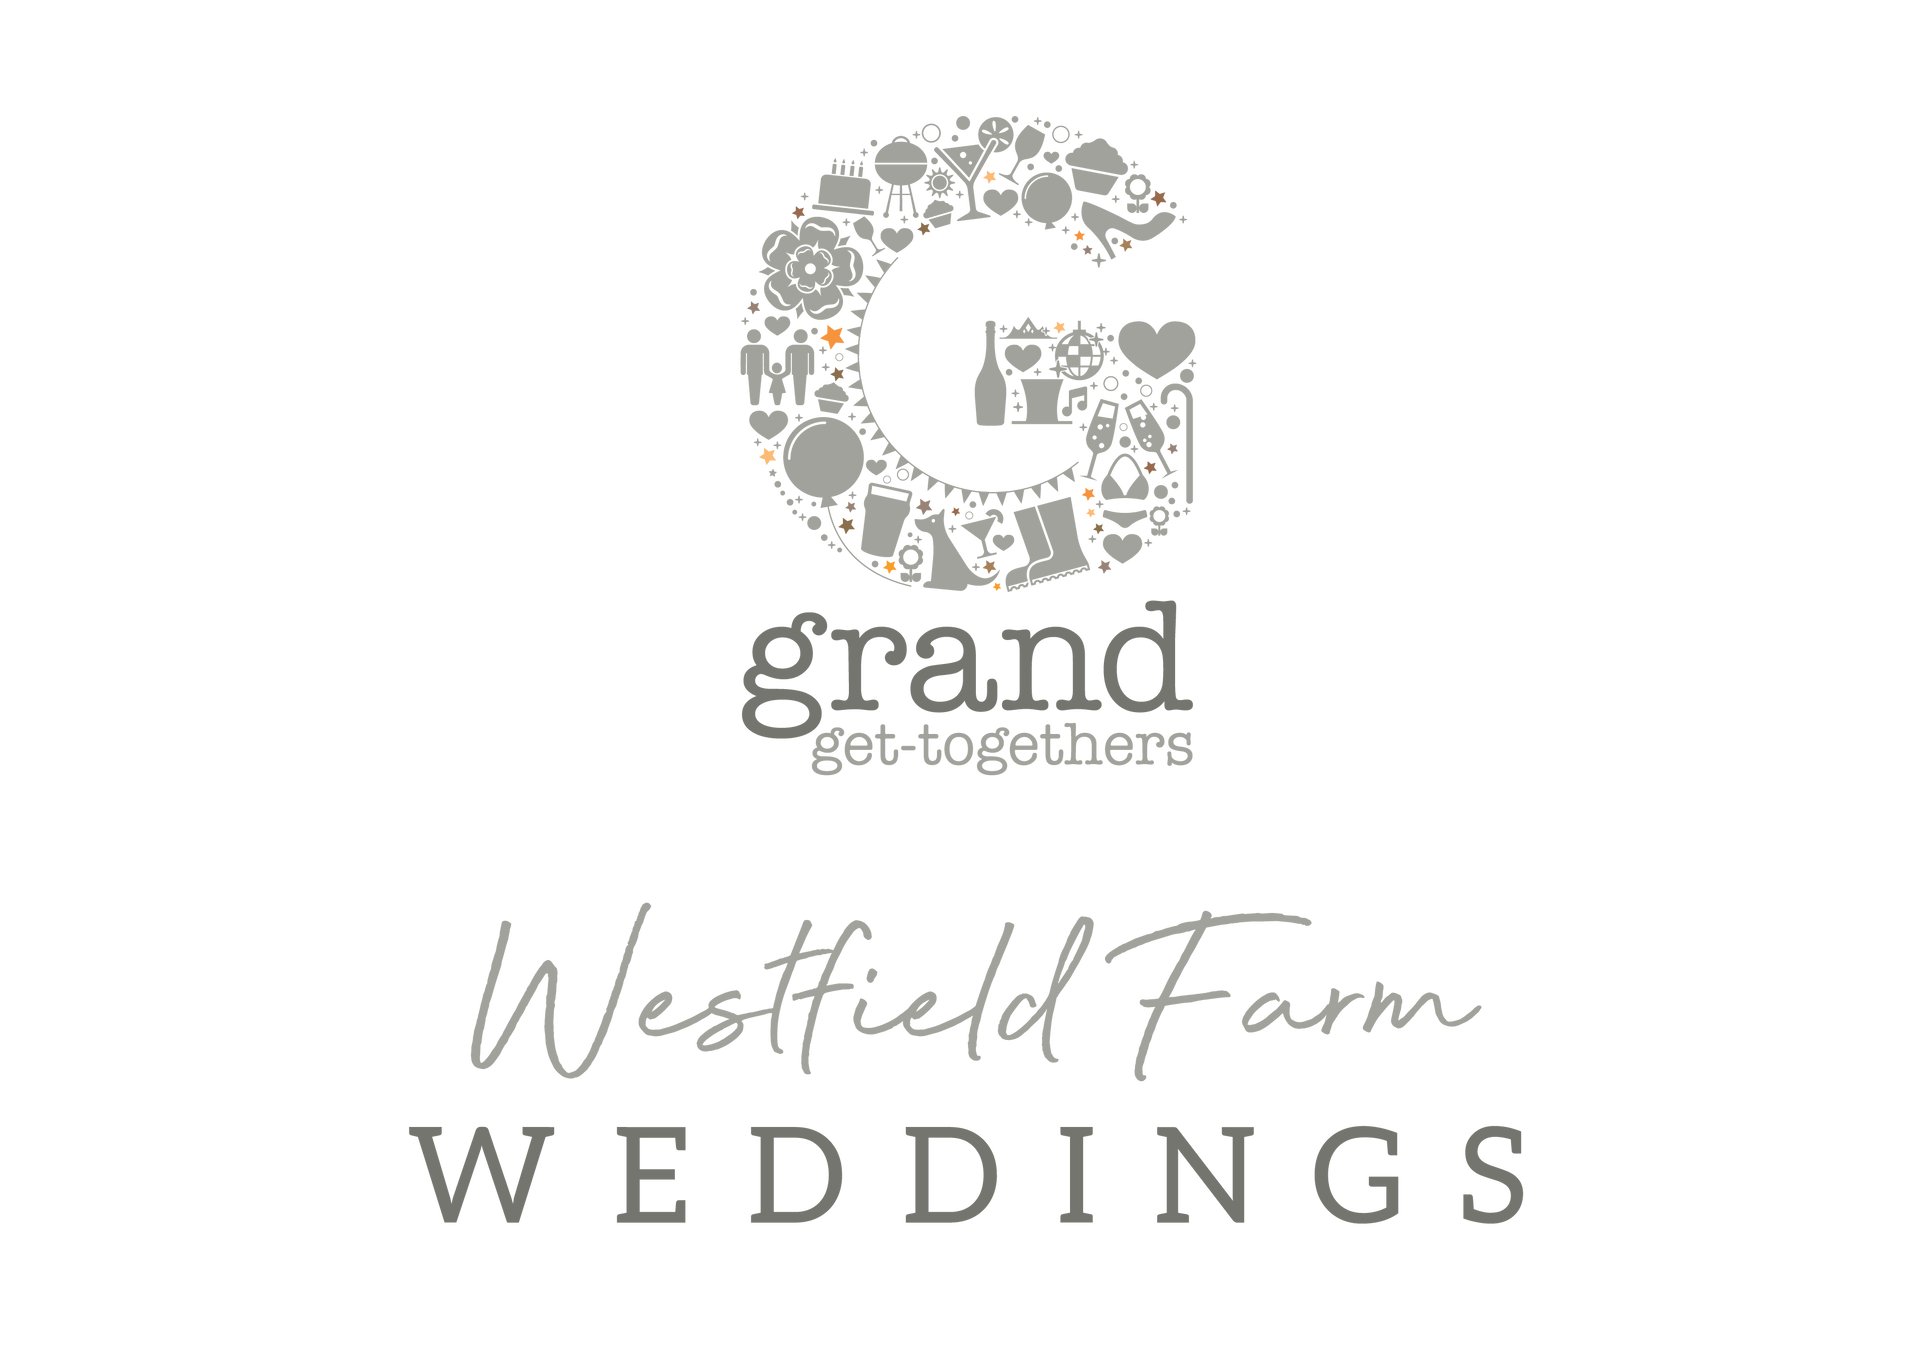 Westfield Farm Weddings and Grand Gettogethers